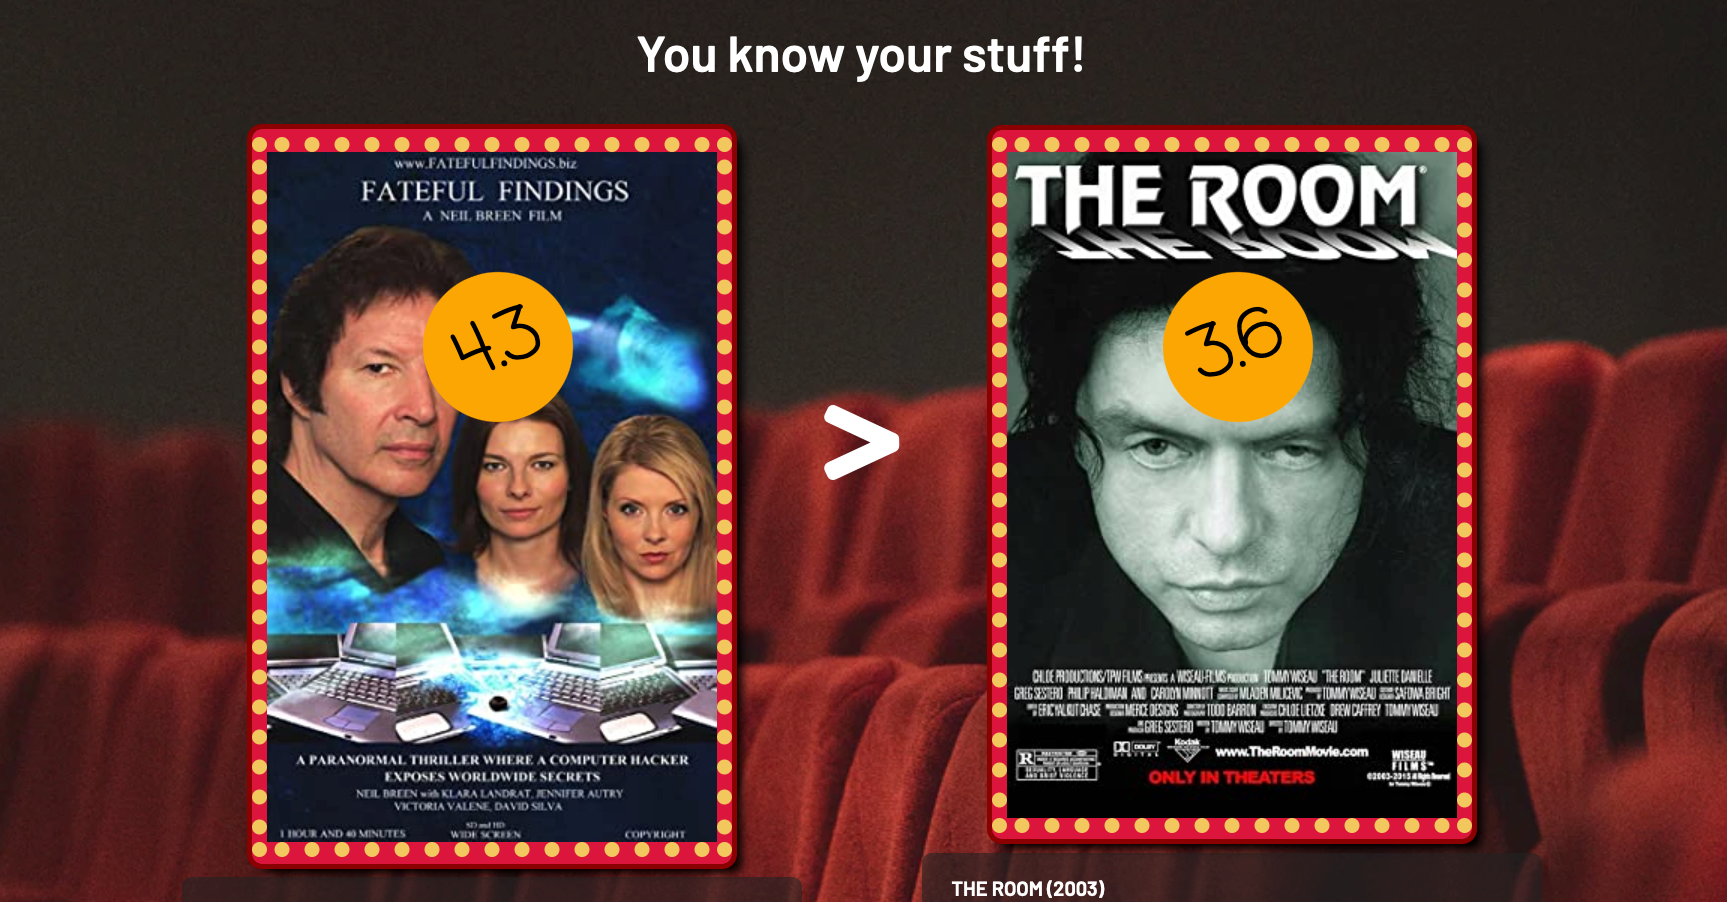 Two movie posters with IMDB user scores against a red backdrop